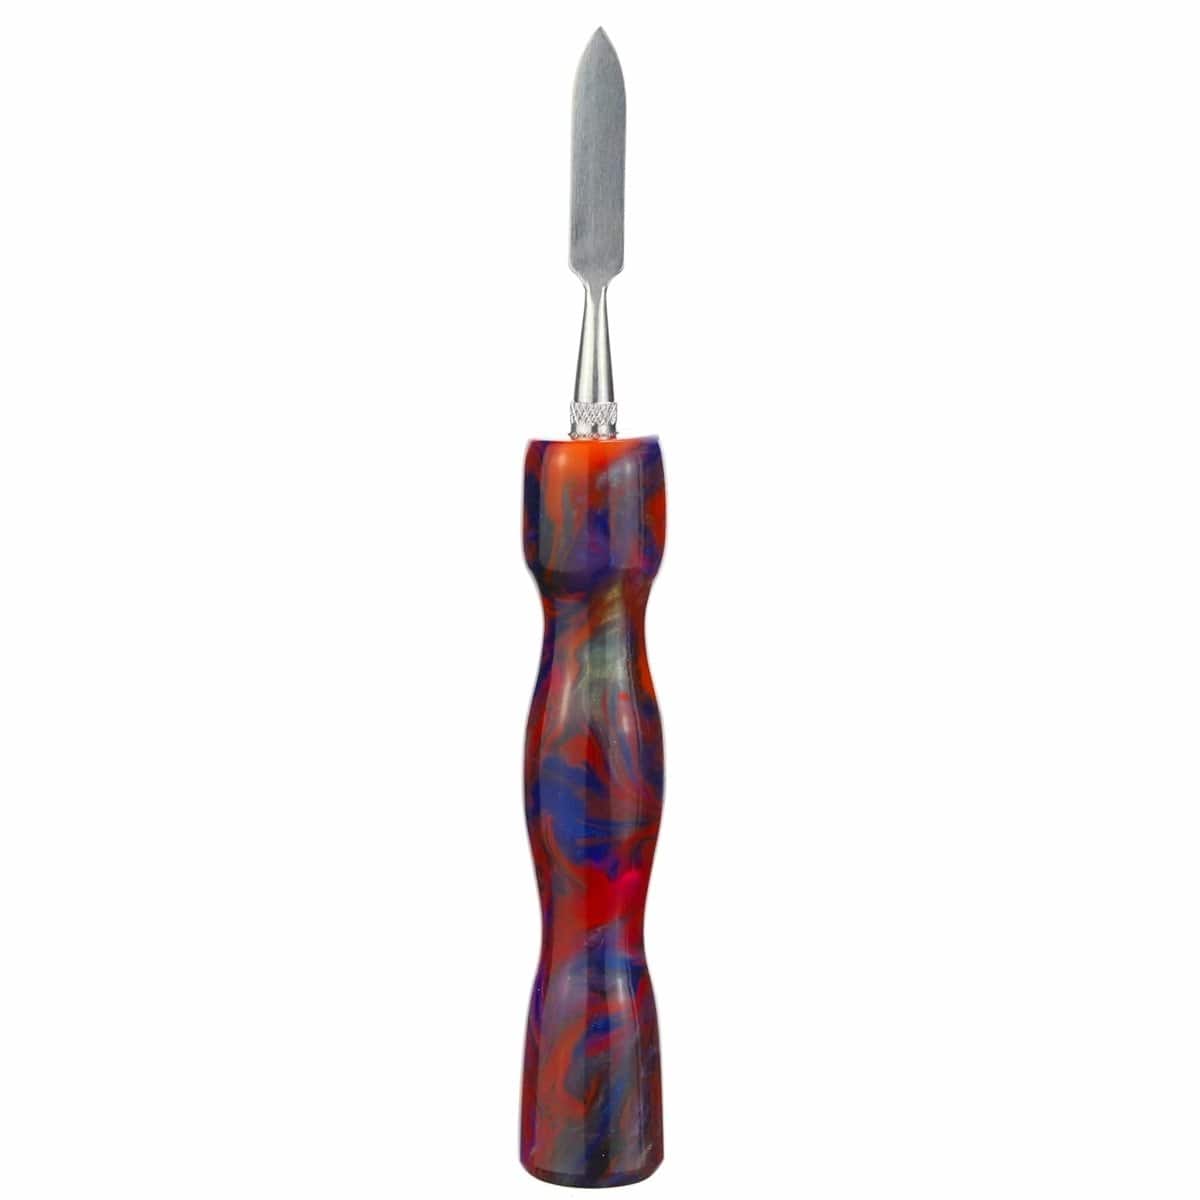 Galactic Crafts Accessory Design 1- Pointed Space Daze Resin Dab Tool